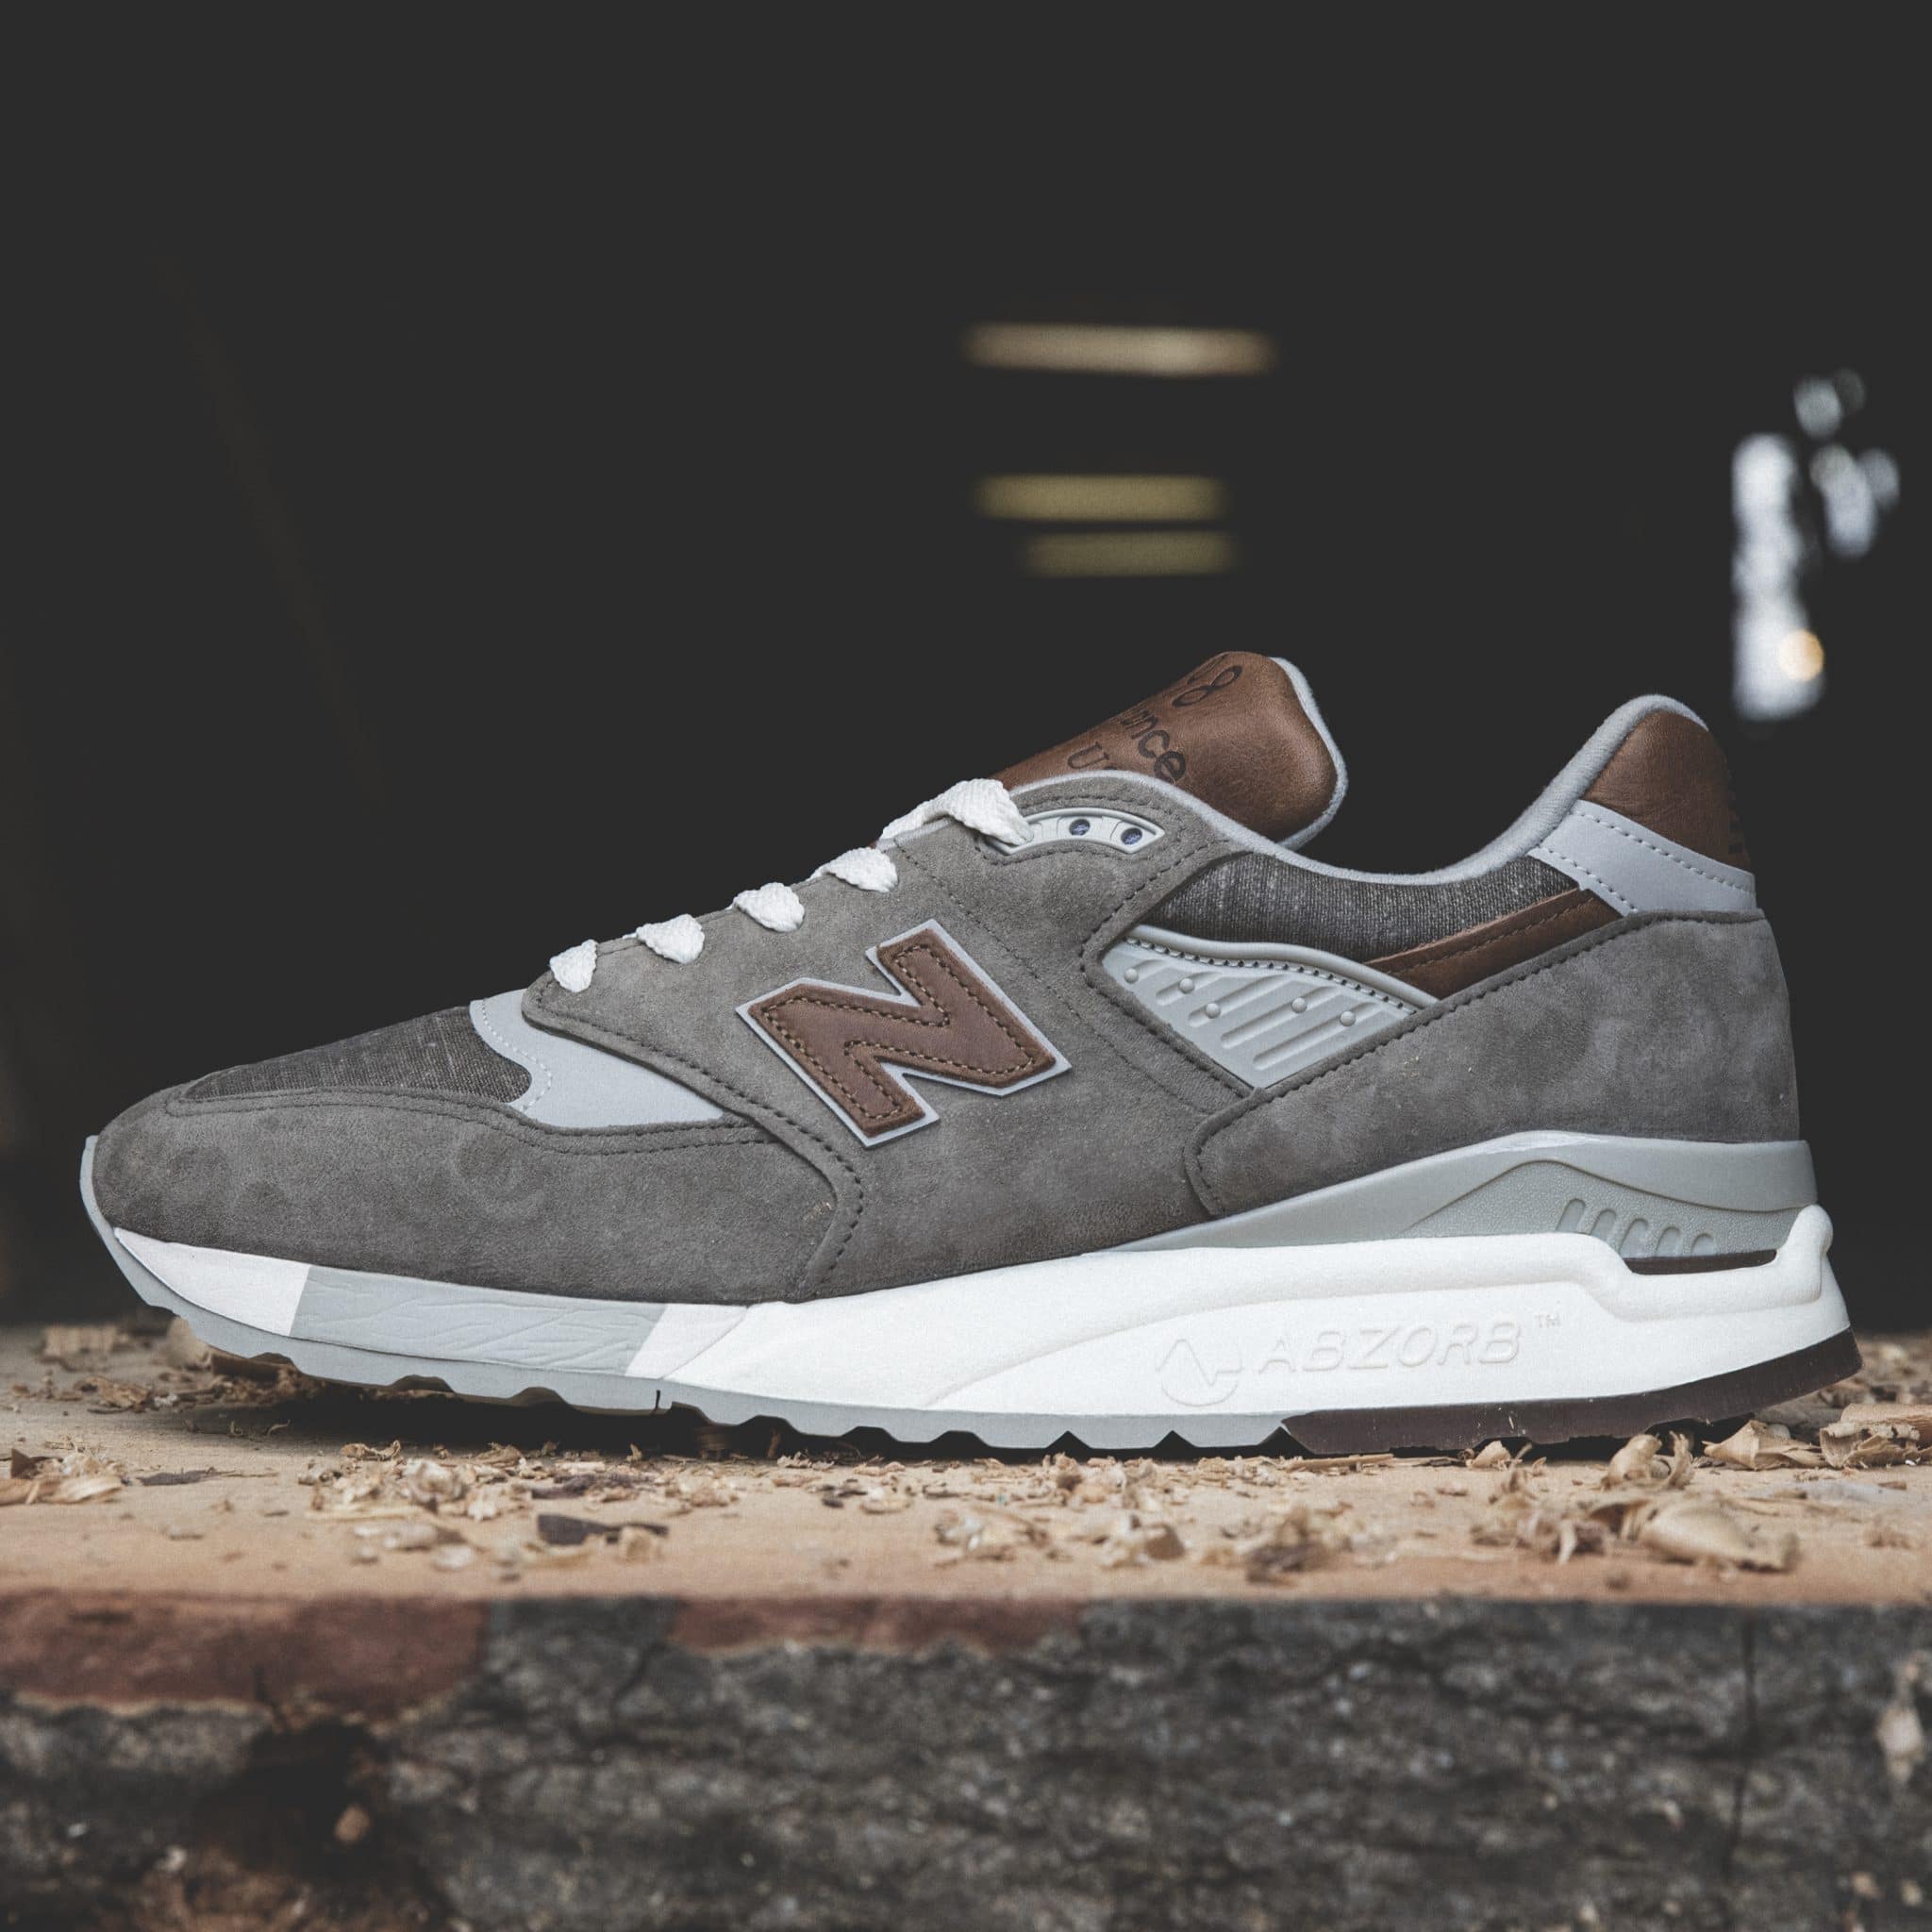 nb_MiUSA_product_M998DBOA_1_imageonly